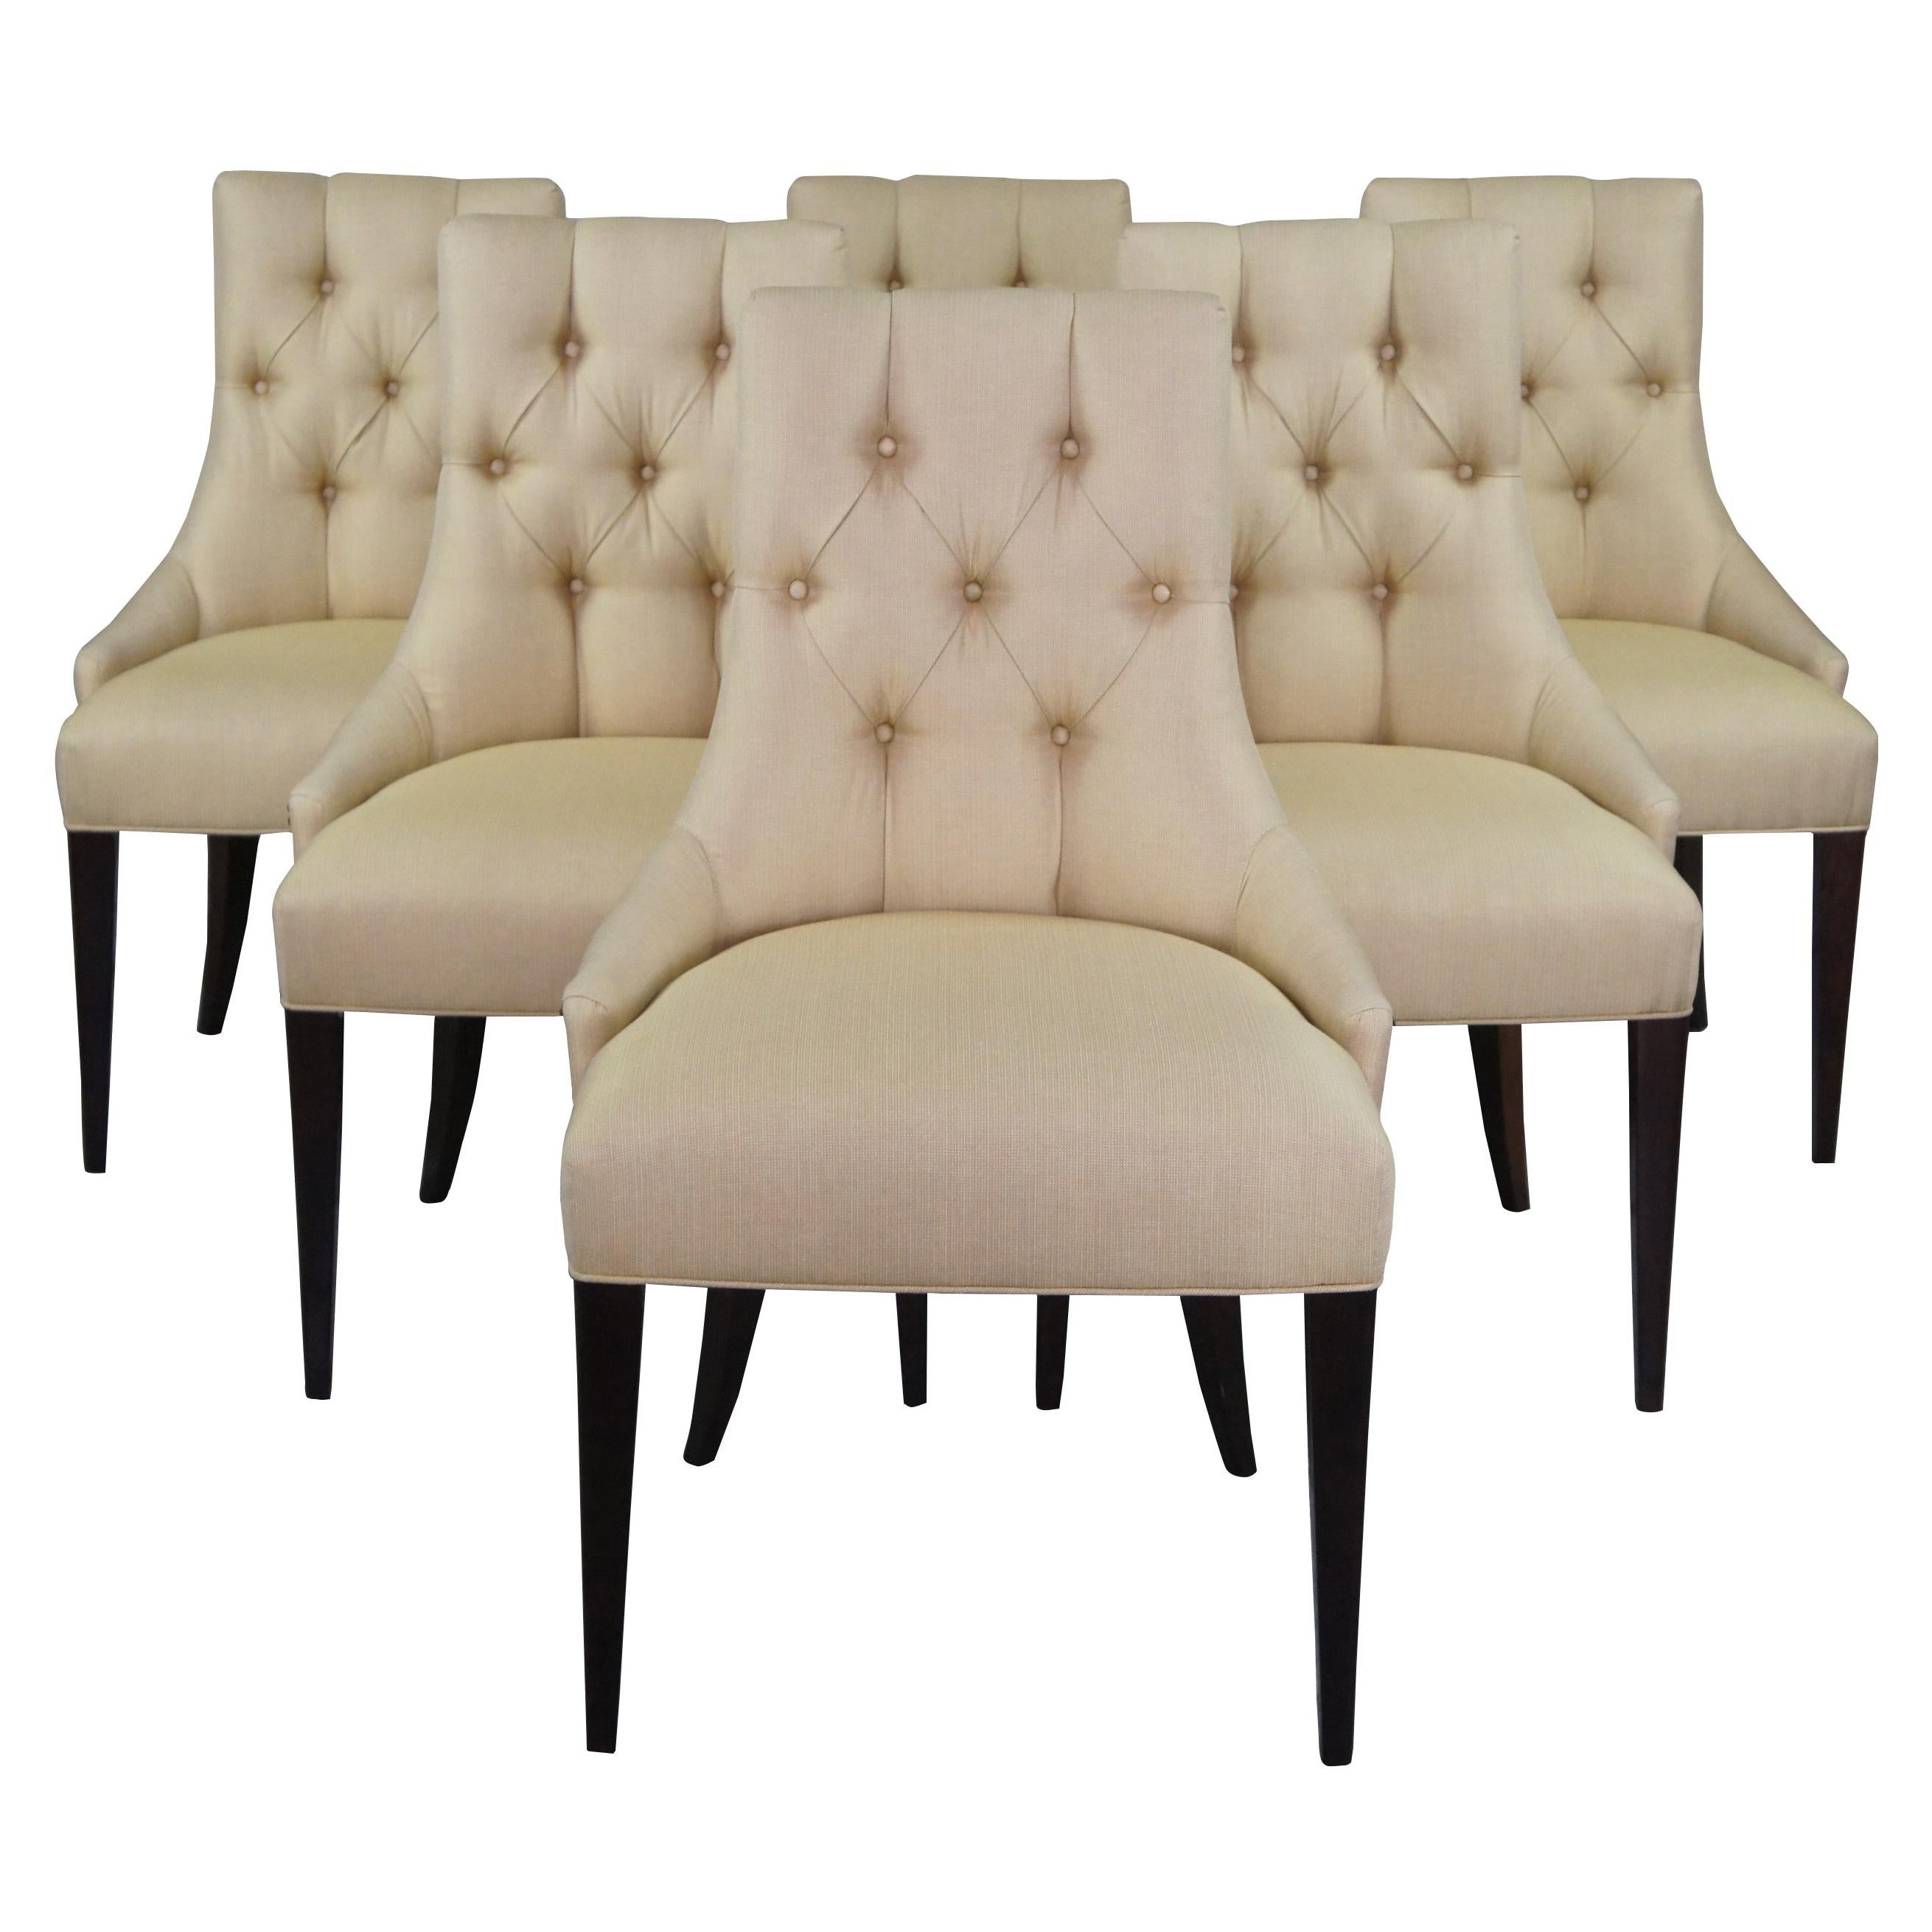 6 Baker Thomas Pheasant Tufted Ritz Dining Chairs Modern Empire Style BA7841